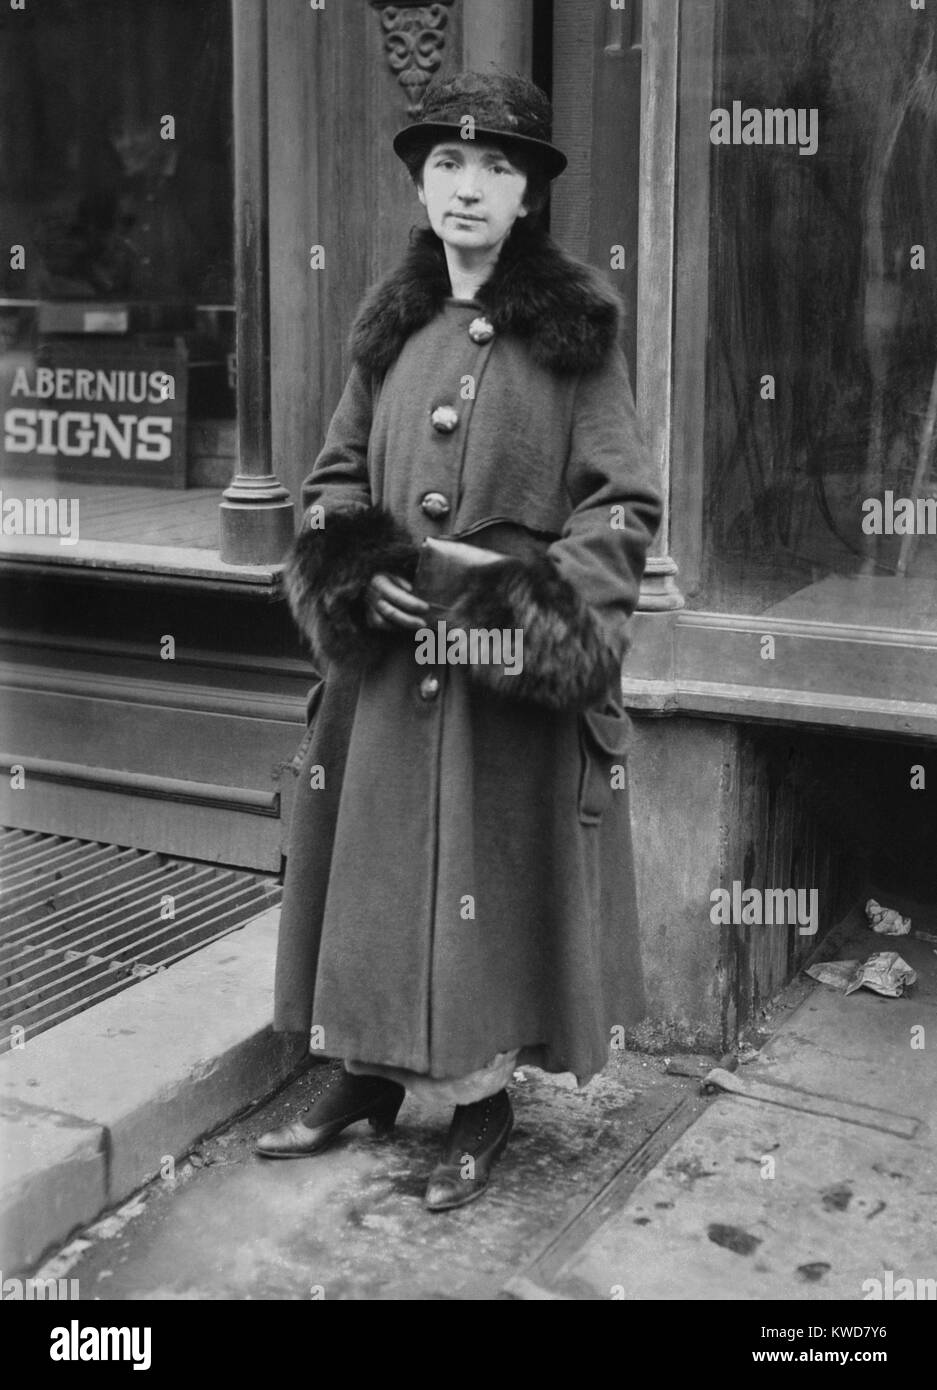 Margaret Sanger outside her birth control clinic in Brownsville, Brooklyn, Oct. 27, 1916. Nine days after its opening as Margaret Sanger was jailed for violating the Comstock obscenity laws. (BSLOC 2015 16 211) Stock Photo